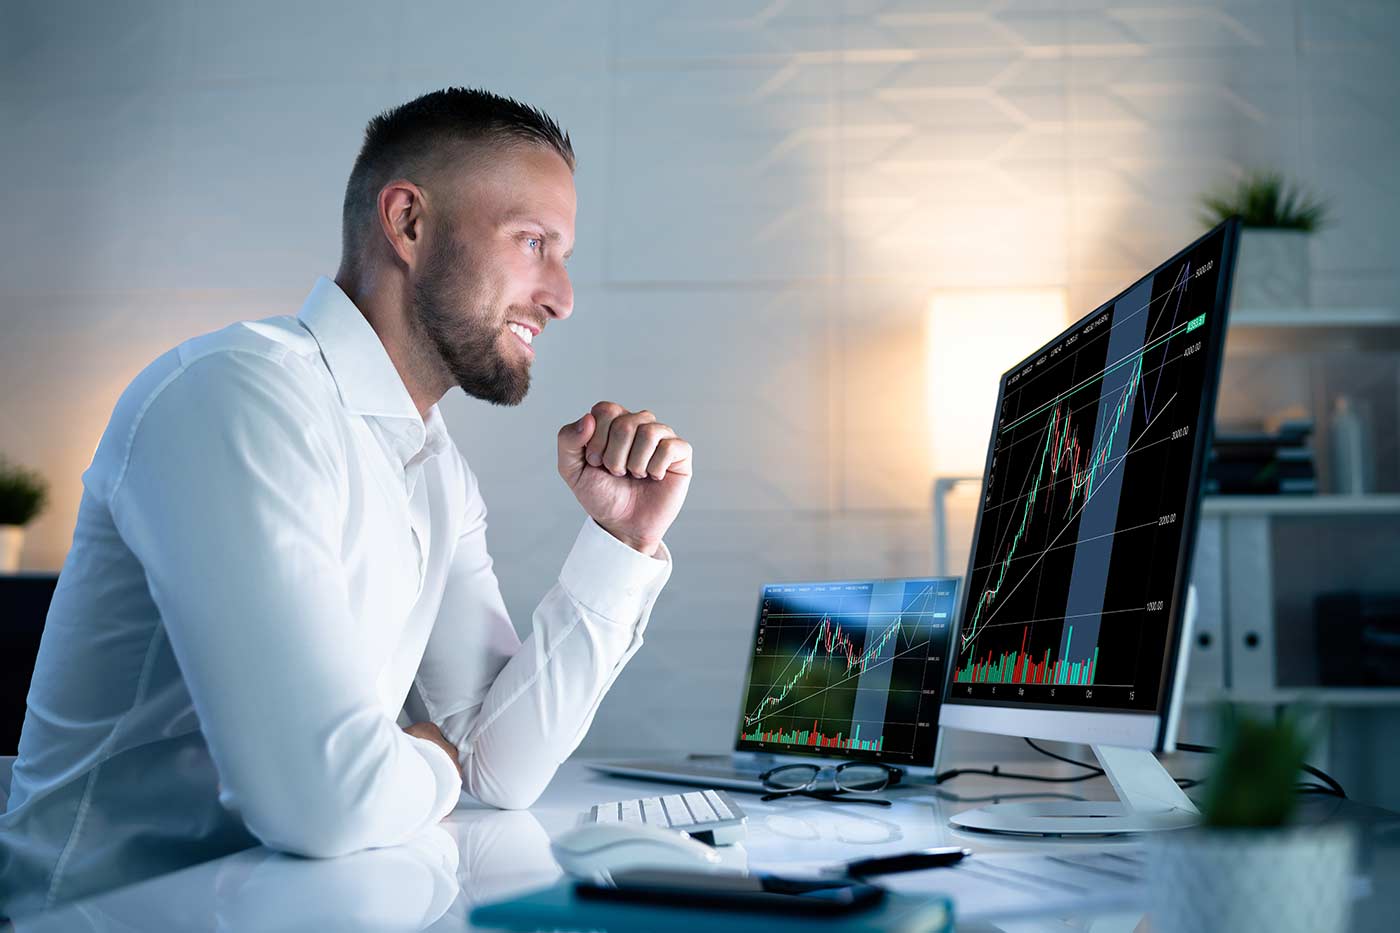 A young businessman in a white shirt sitting at a desk watching a computer and celebrating day trader win